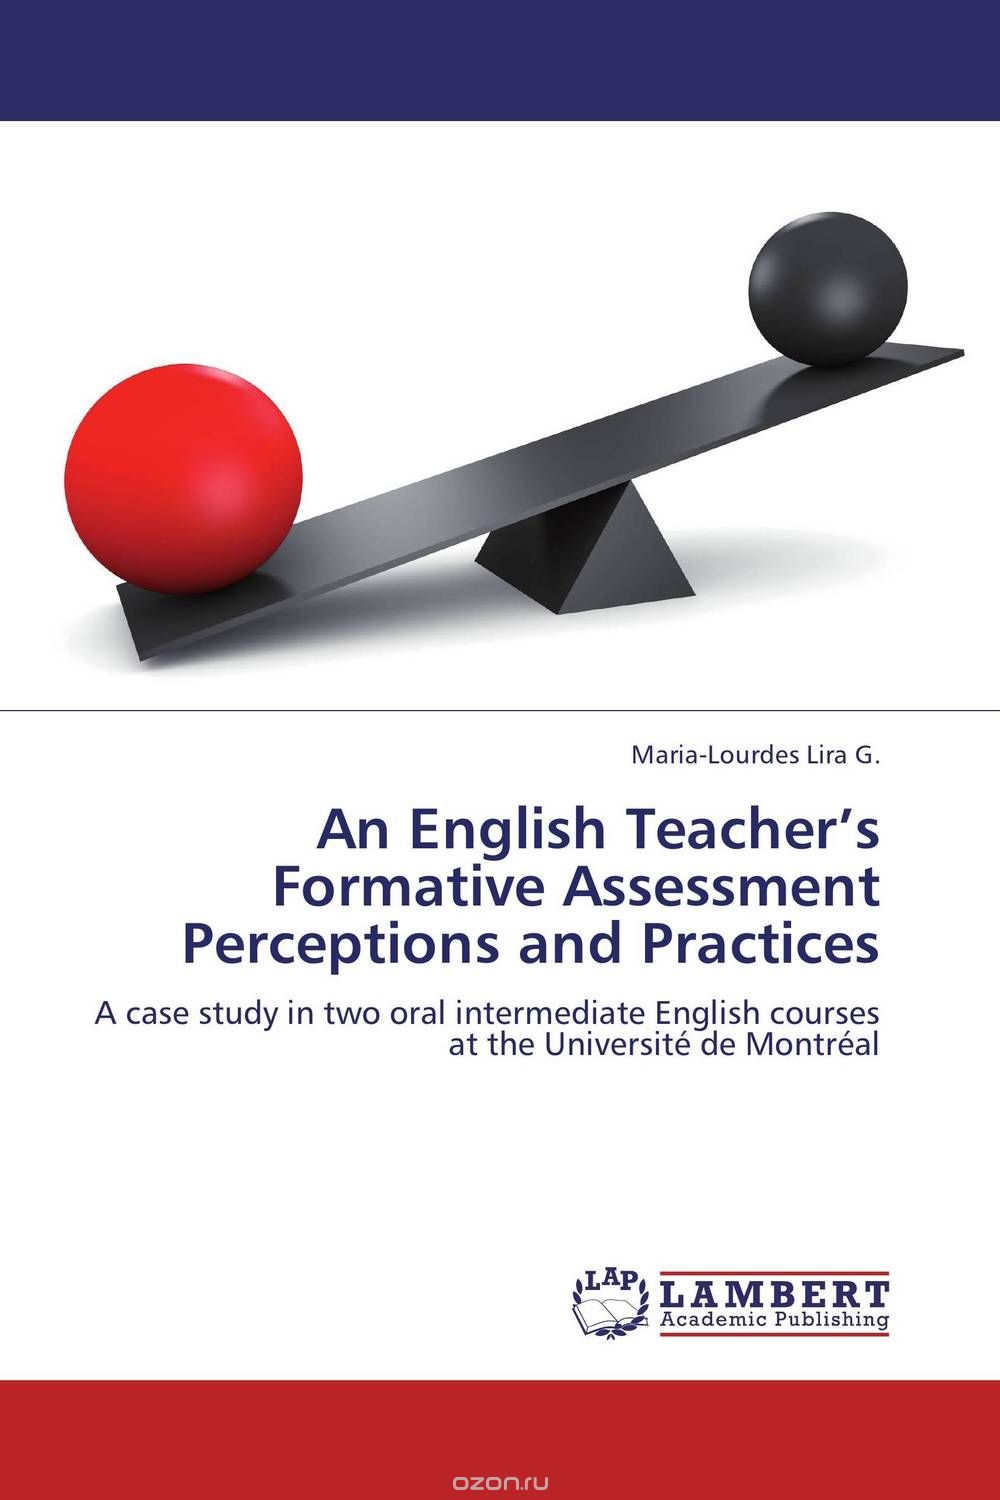 An English Teacher’s Formative Assessment Perceptions and Practices